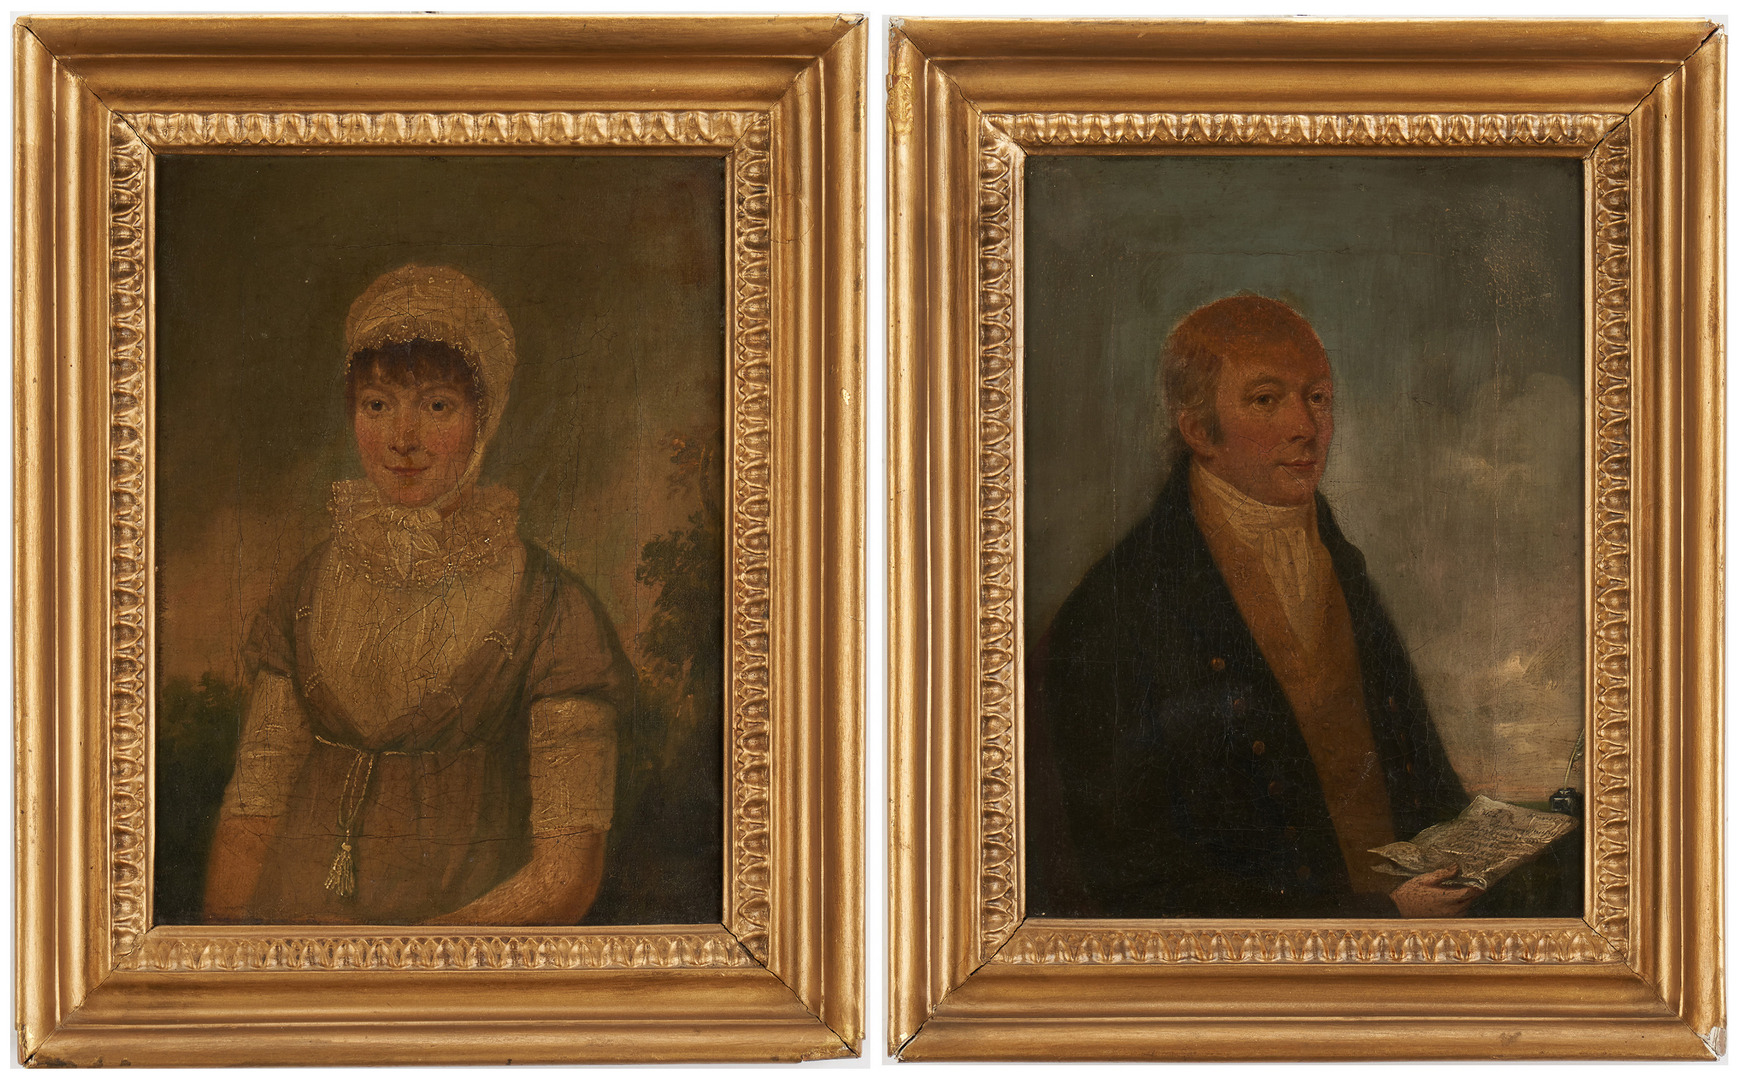 Lot 762: Pair of 18th Century Portraits, Man with Letter and Woman in Bonnet